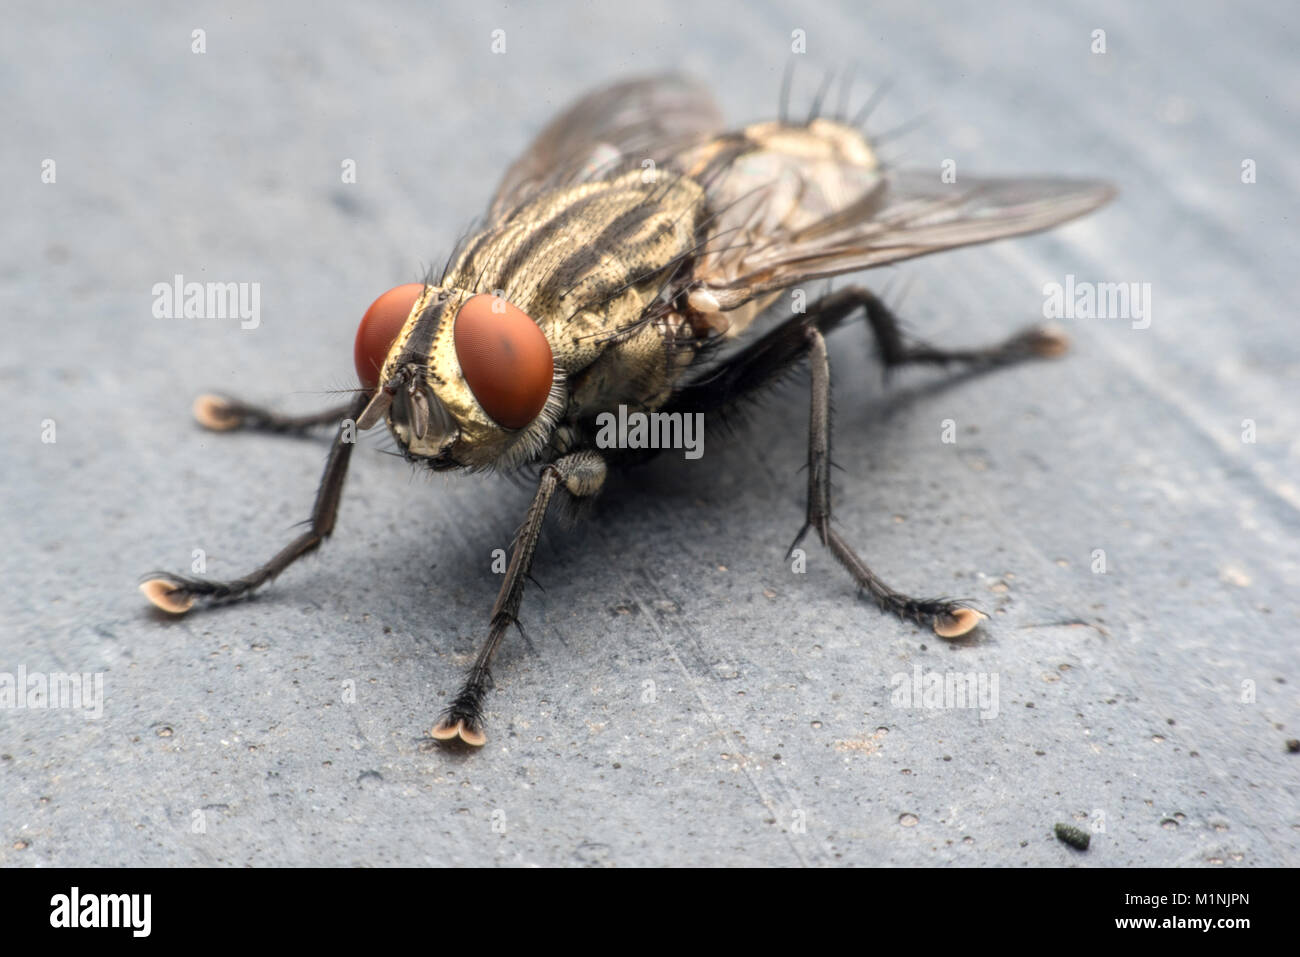 Blow fly, carrion fly, bluebottles, greenbottles Stock Photo